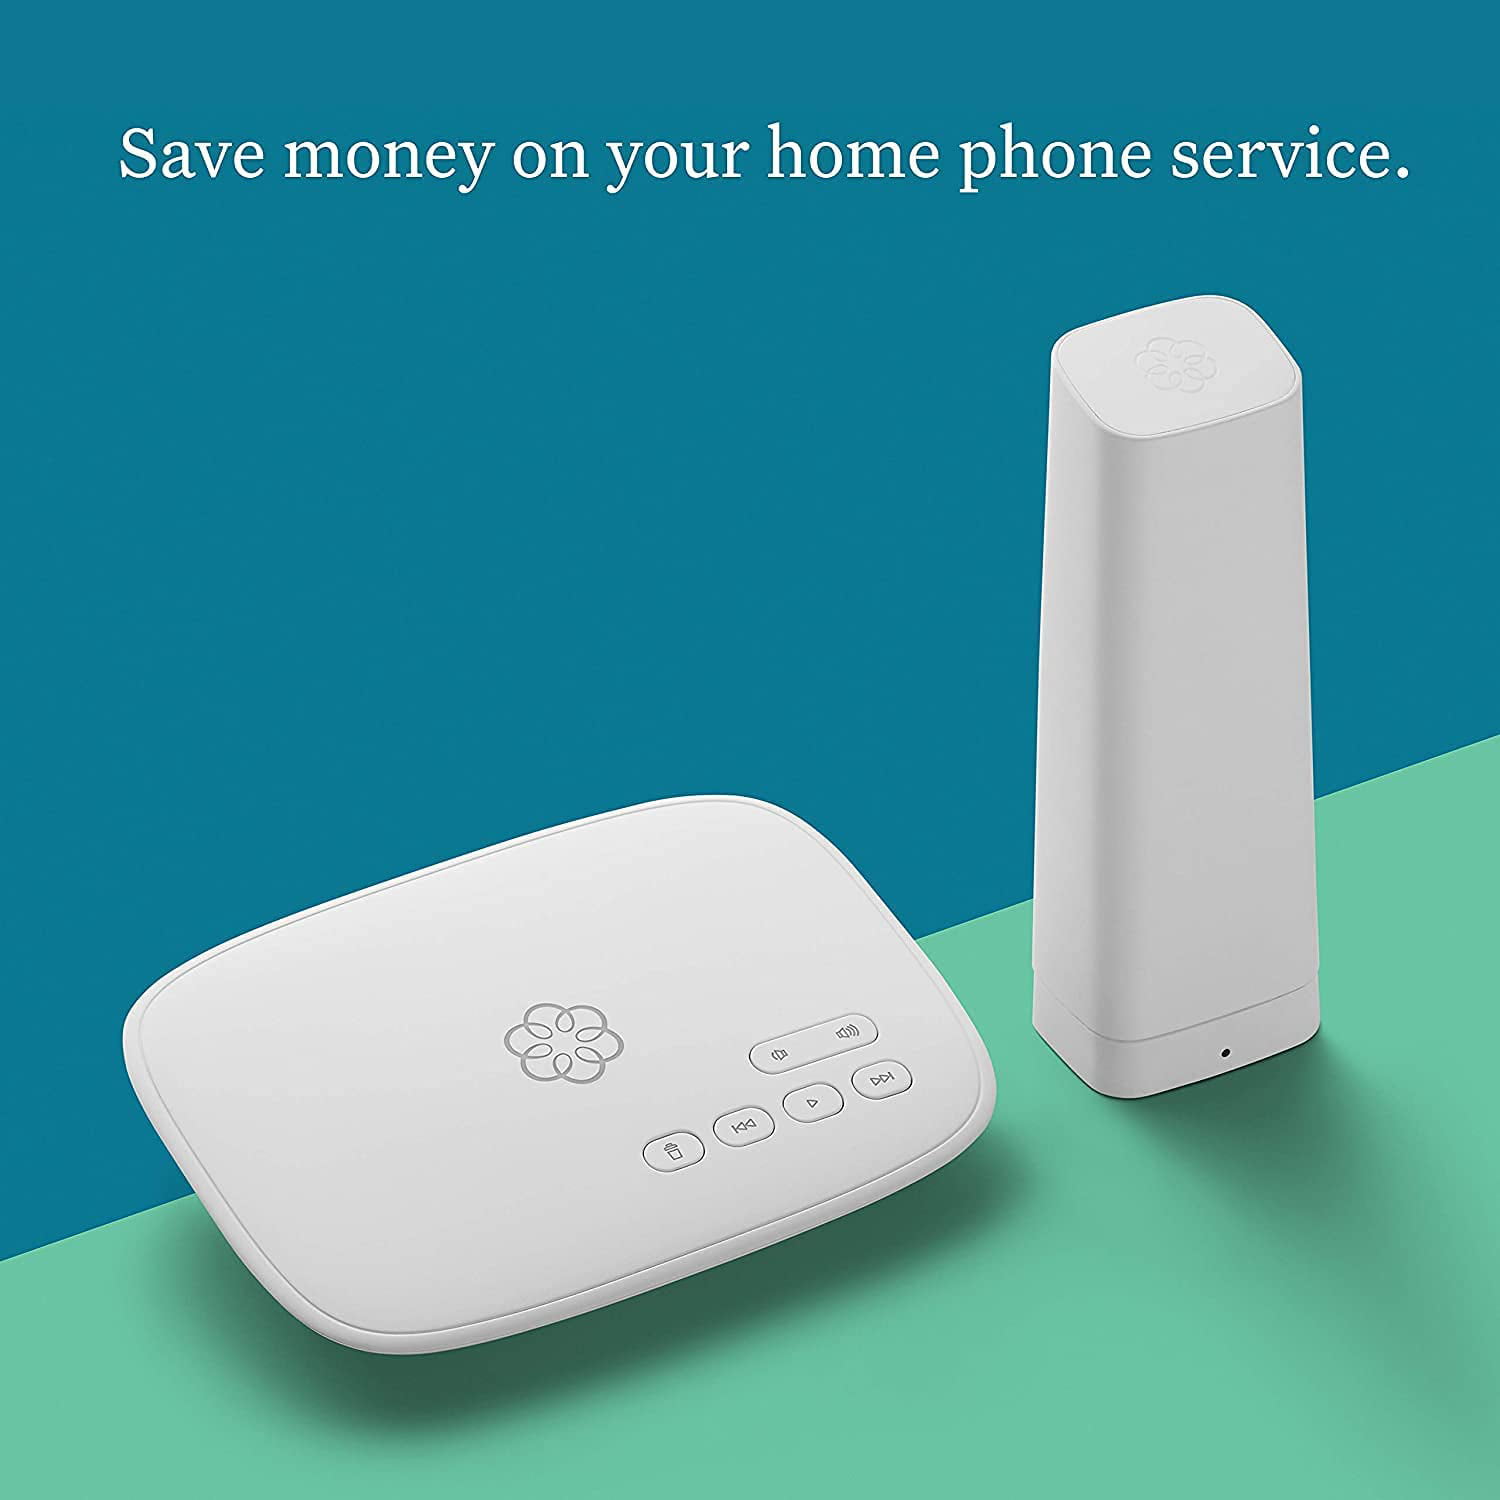 Works During Power and Internet outages Option to Block Robocalls. Affordable Internet-Based landline Replacement Ooma Telo 4G VoIP Home Phone and Backup Internet Service